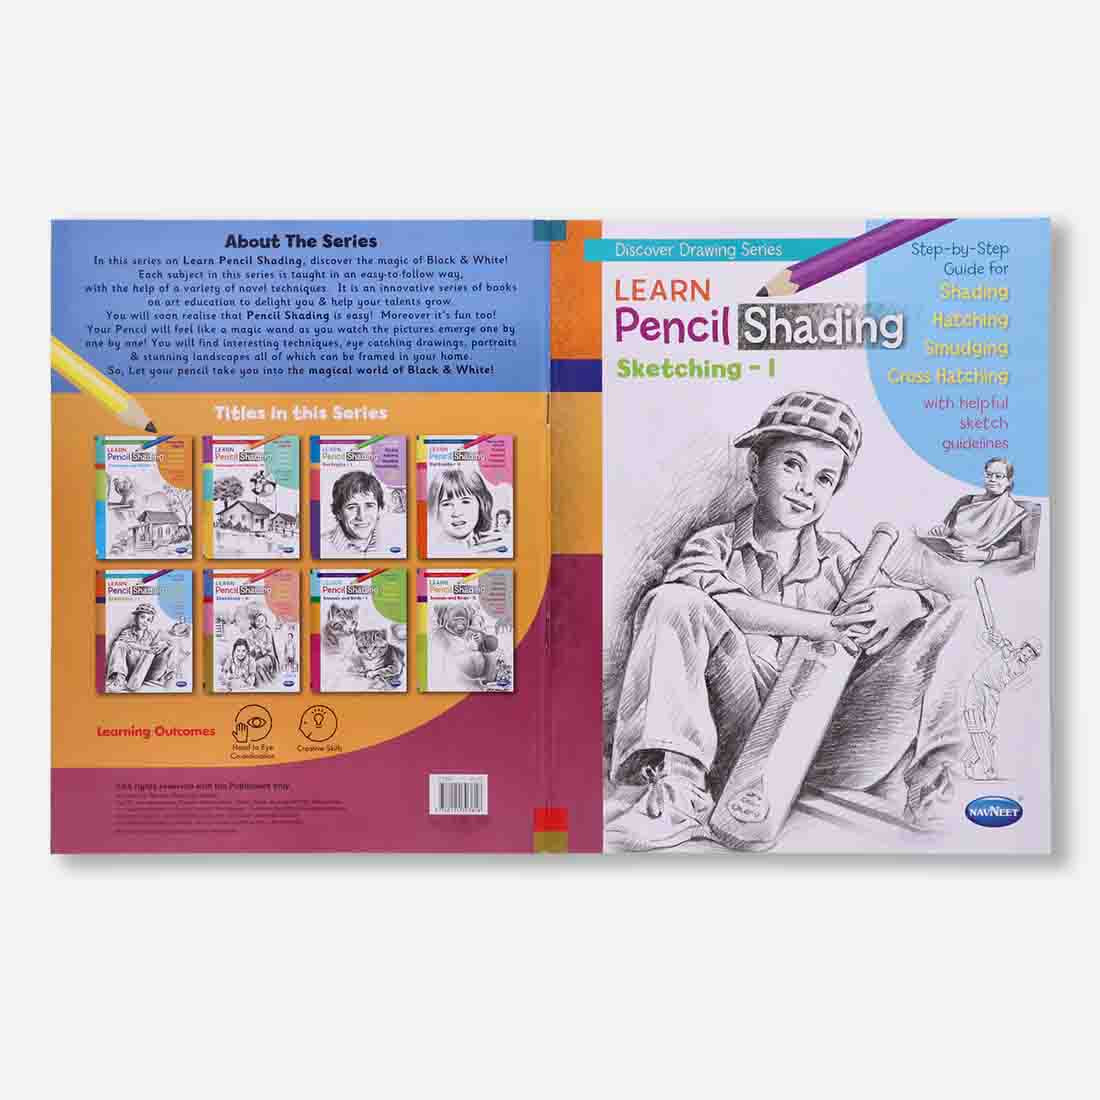 Navneet Learn Pencil Shading Sketching 1 and 2 – For Elementary Art Prep – How to draw sketches - Pack of 2 Books